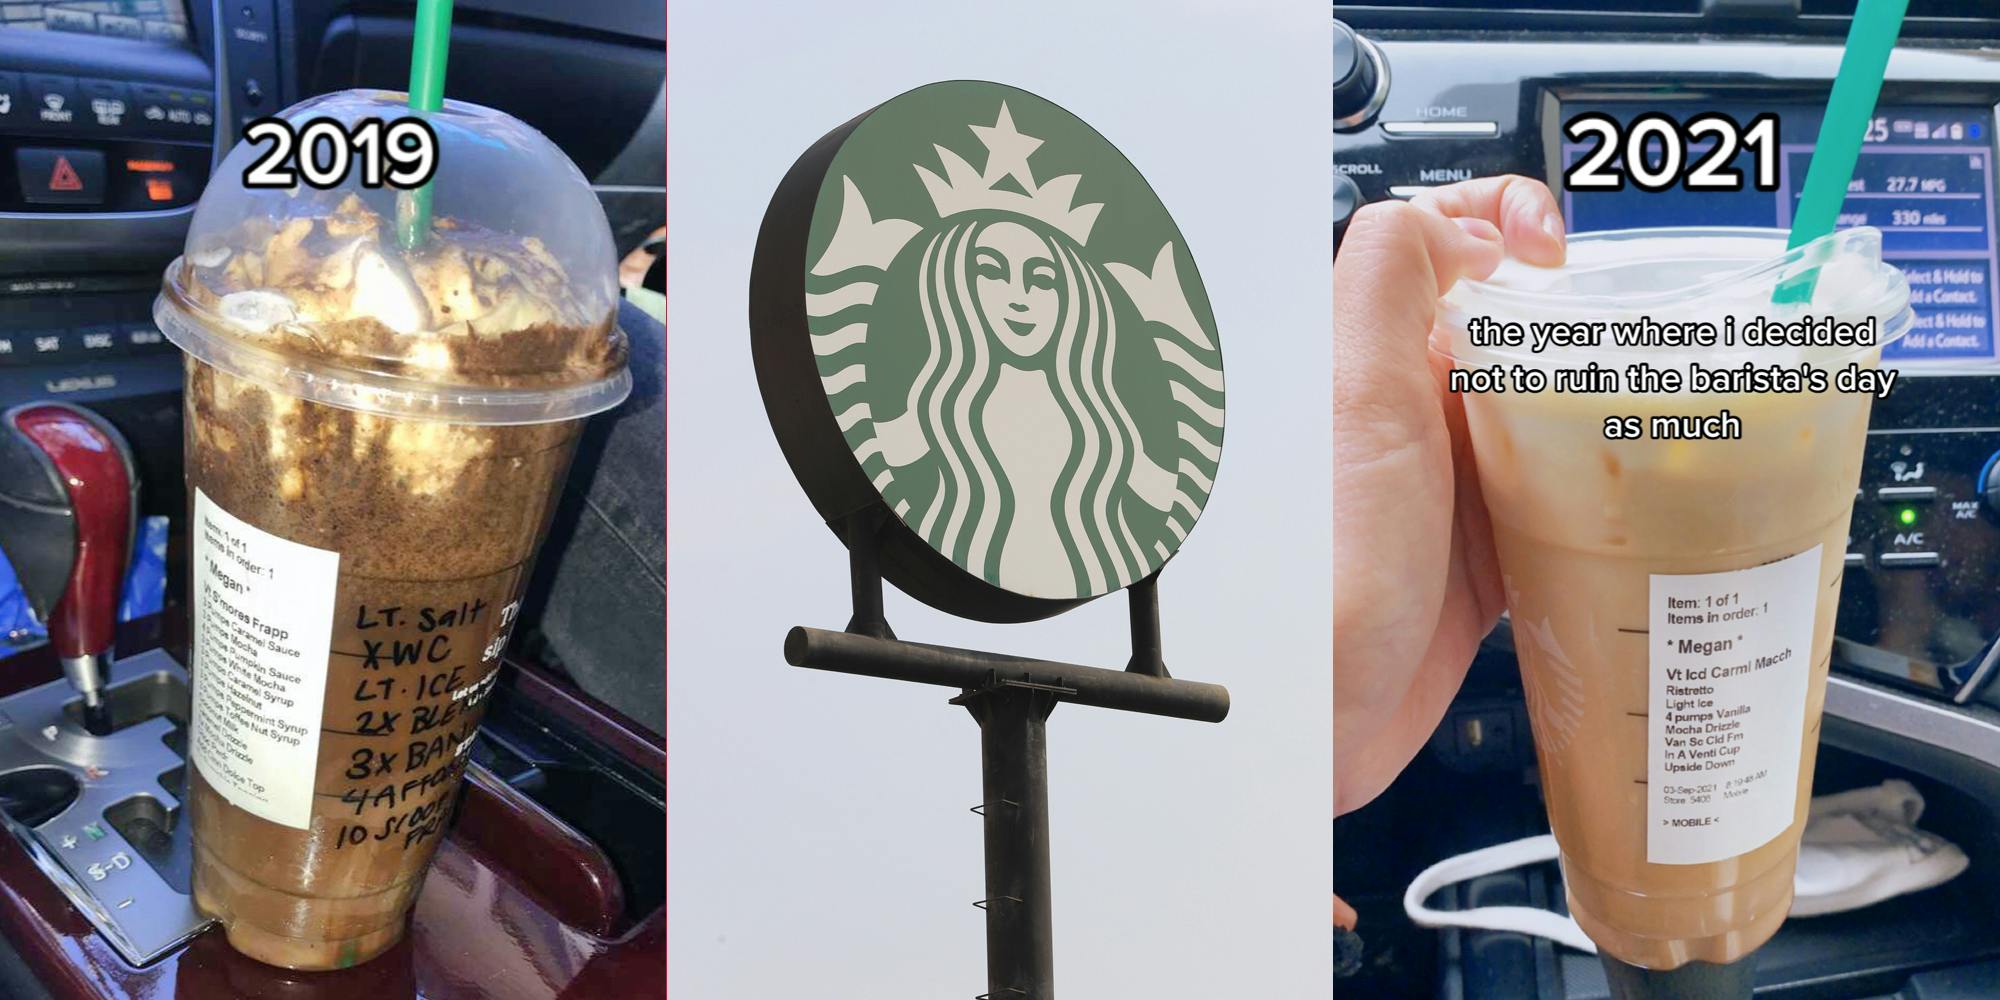 Starbucks drink in car with caption "2019" (l) Starbucks sign in front of cloudy sky (c) Starbucks drink in car with caption "2021 the year where I decided not to ruin the barista's day as much" (r)